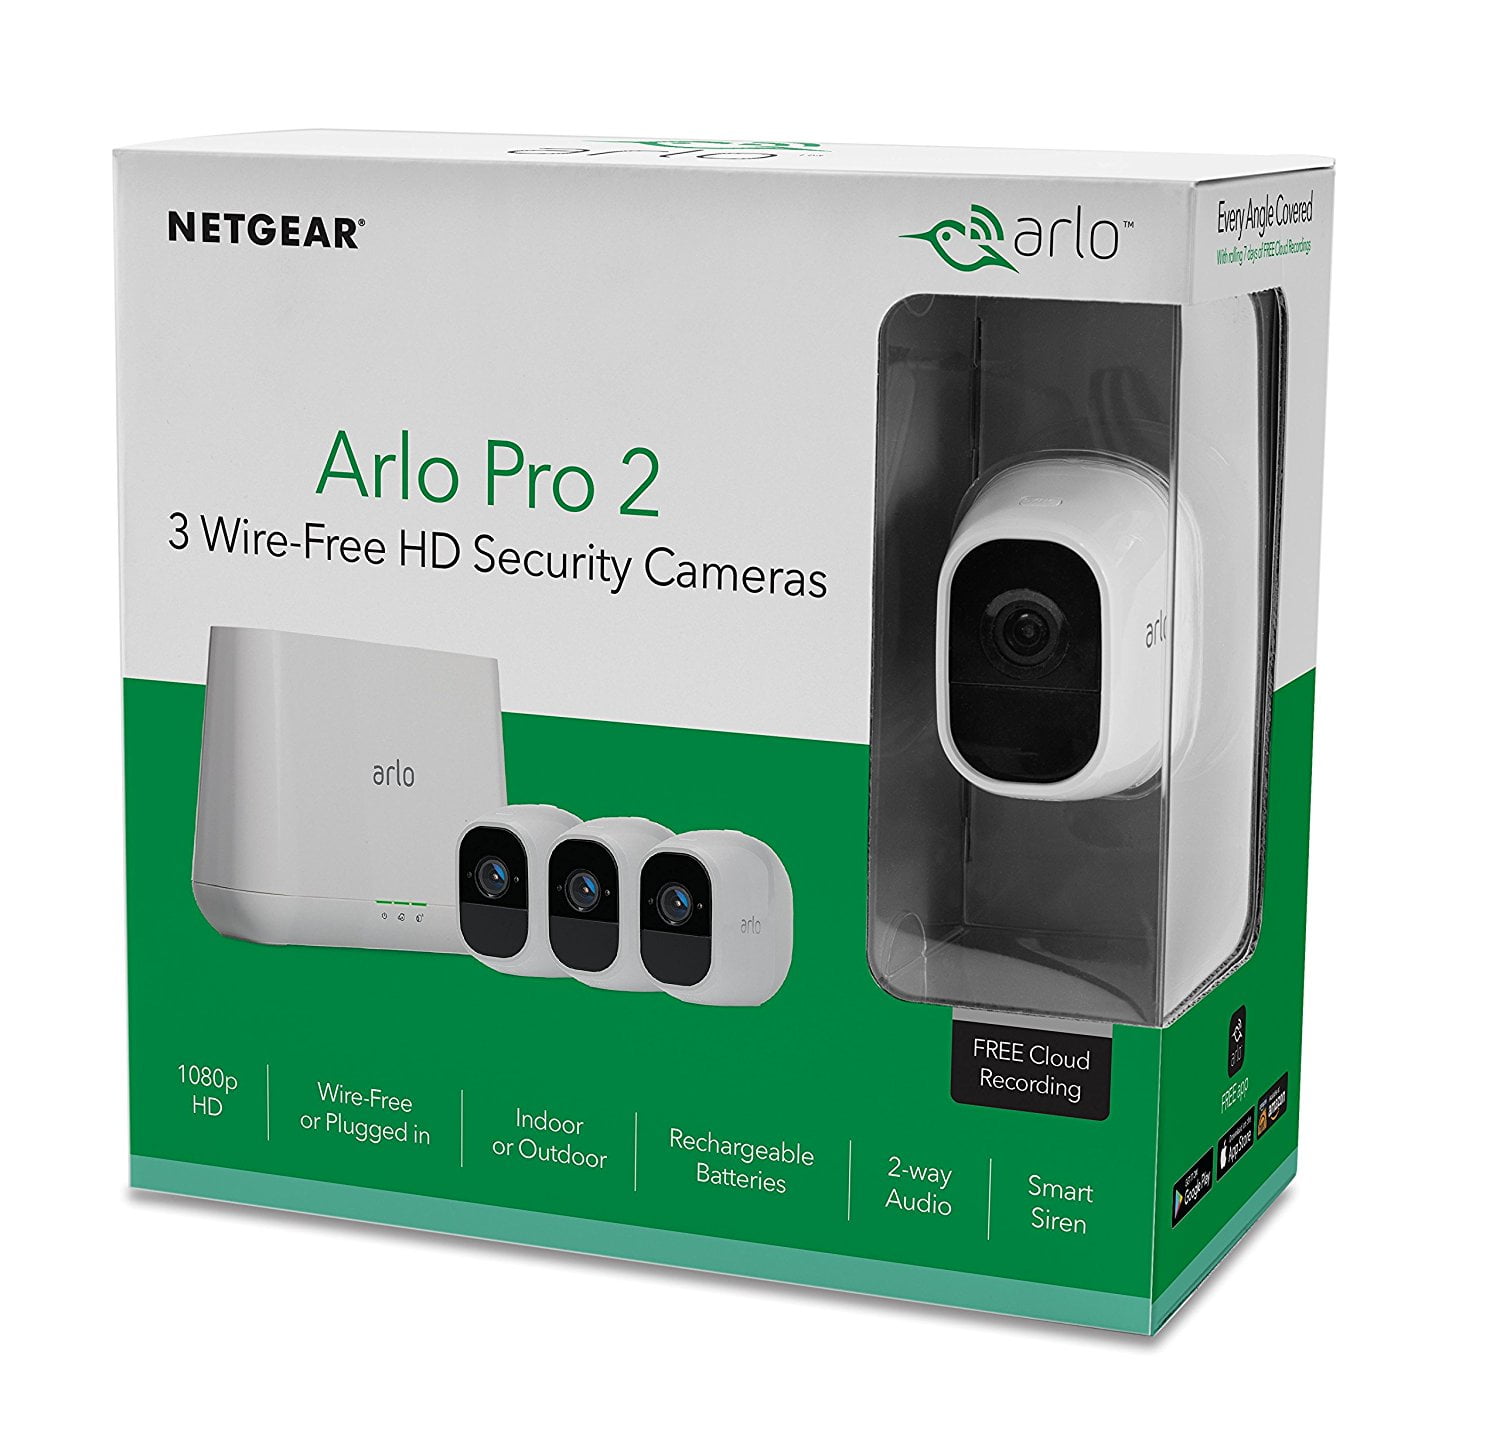 Arlo Pro - 3 Wire-Free Camera 1080P HD Smart Security System (VMS4330P-100NAS) Motion Detection, Night Indoor/Outdoor, Two-Way Audio Walmart.com